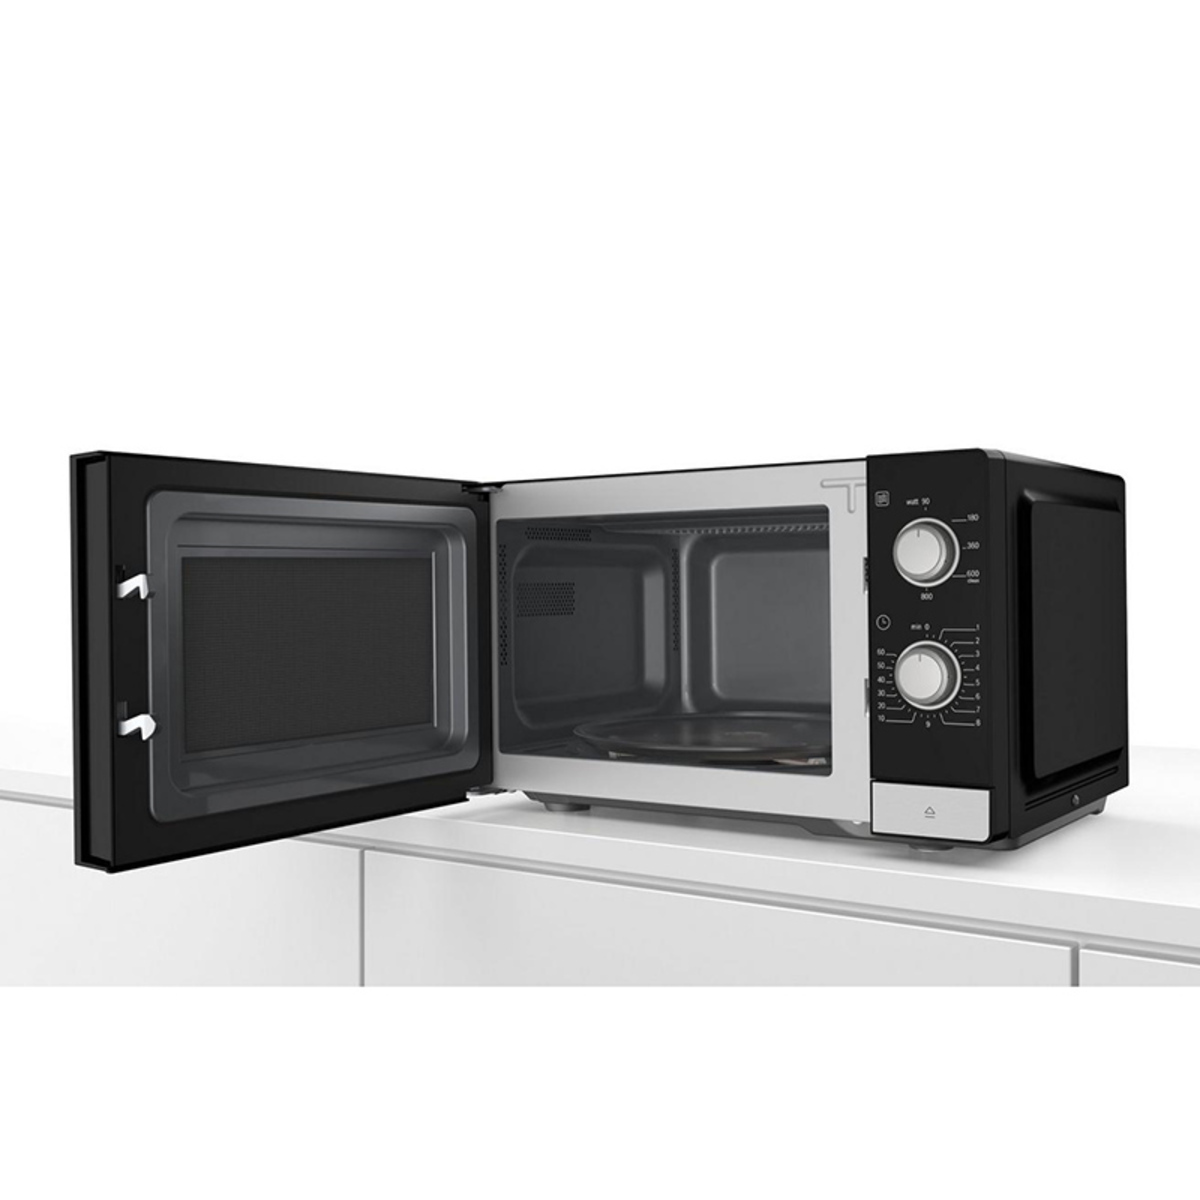 Bosch FFL020MS2B 800w 20 Litres Solo Microwave Oven, Black/Stainless